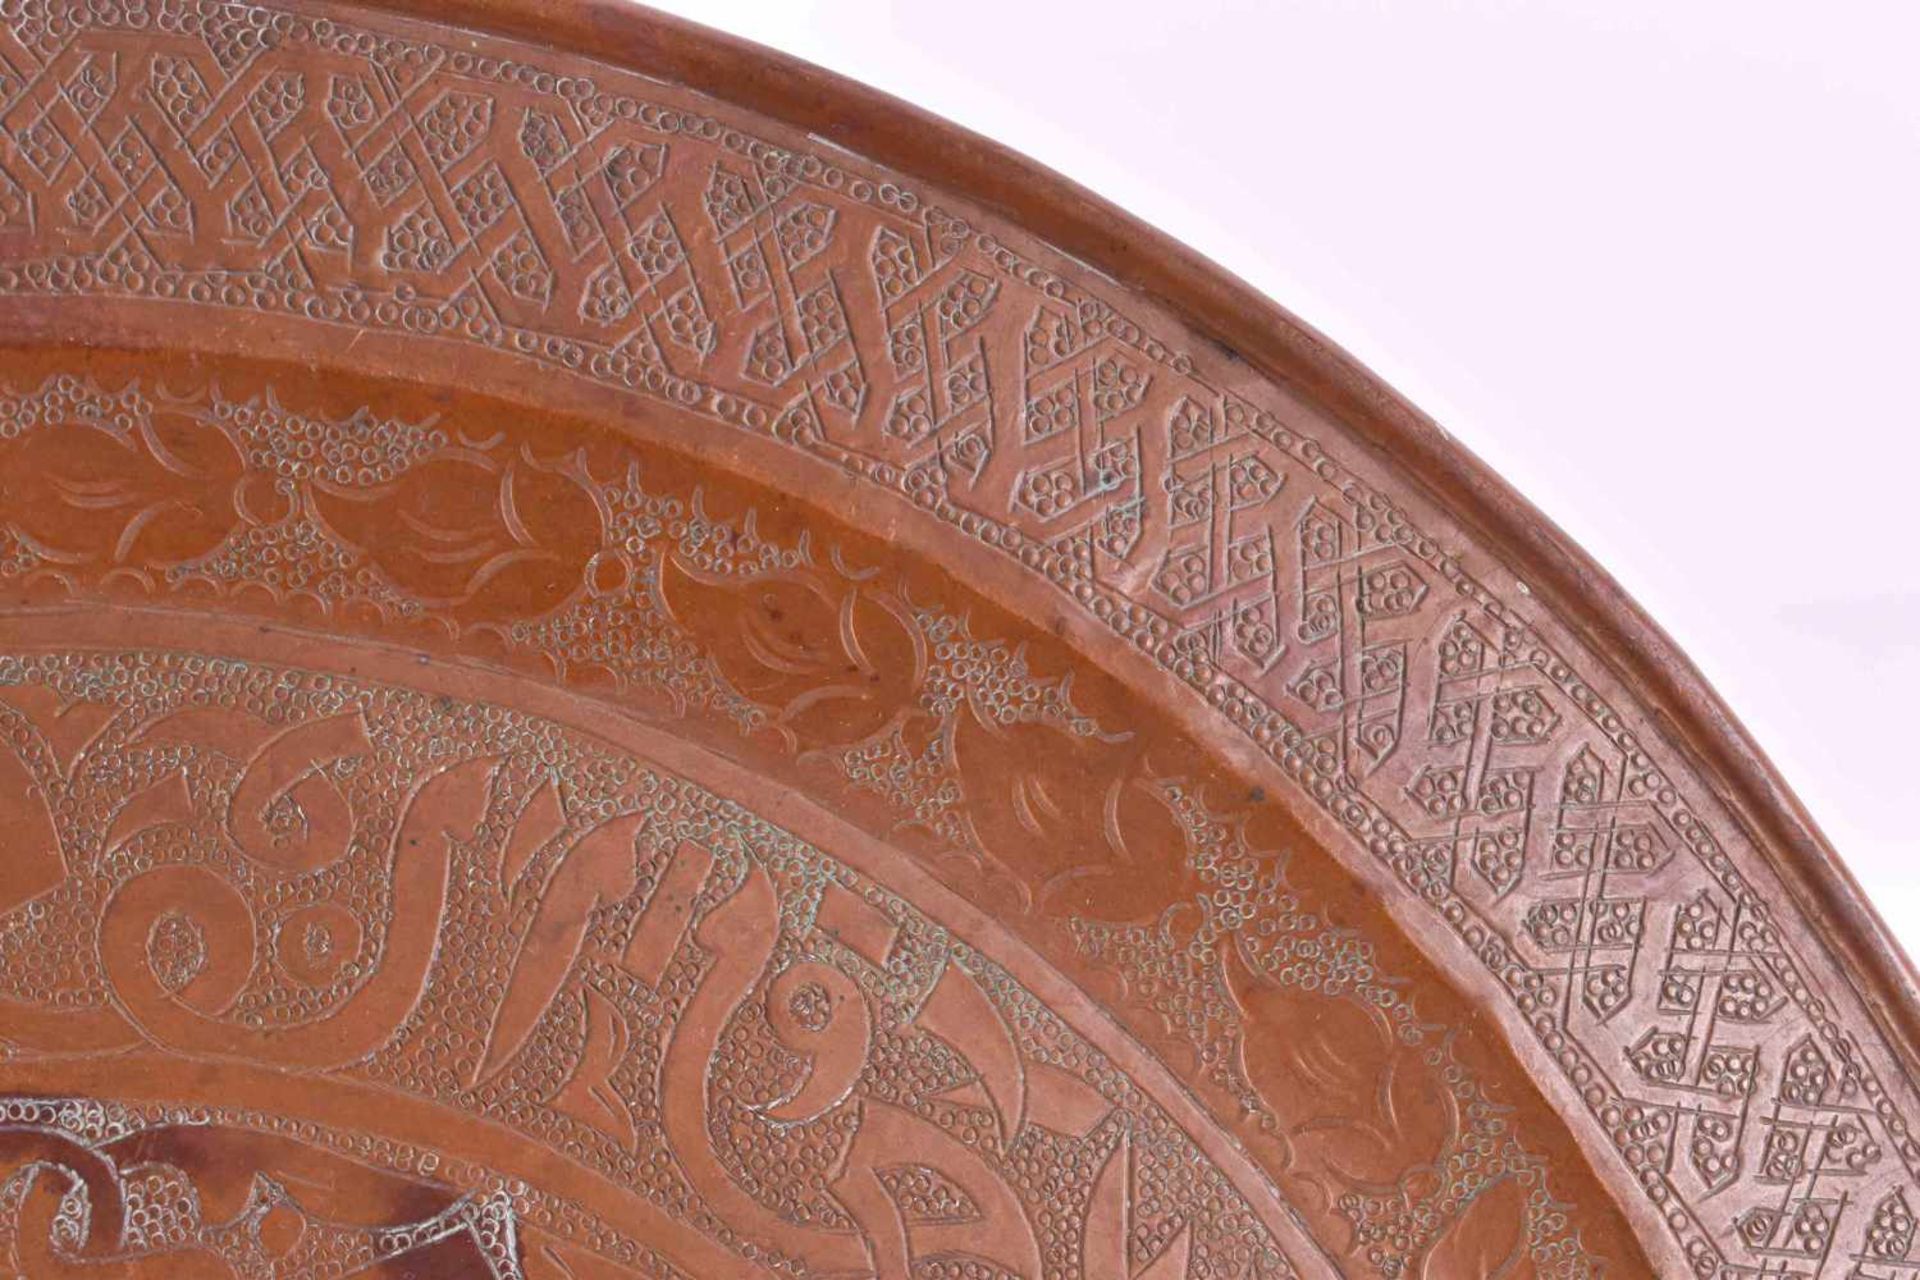 Plate Mameluk 19th centurycopper, finely chased with ornaments and calligraphy, Ø 47.5 cmTeller - Image 4 of 4